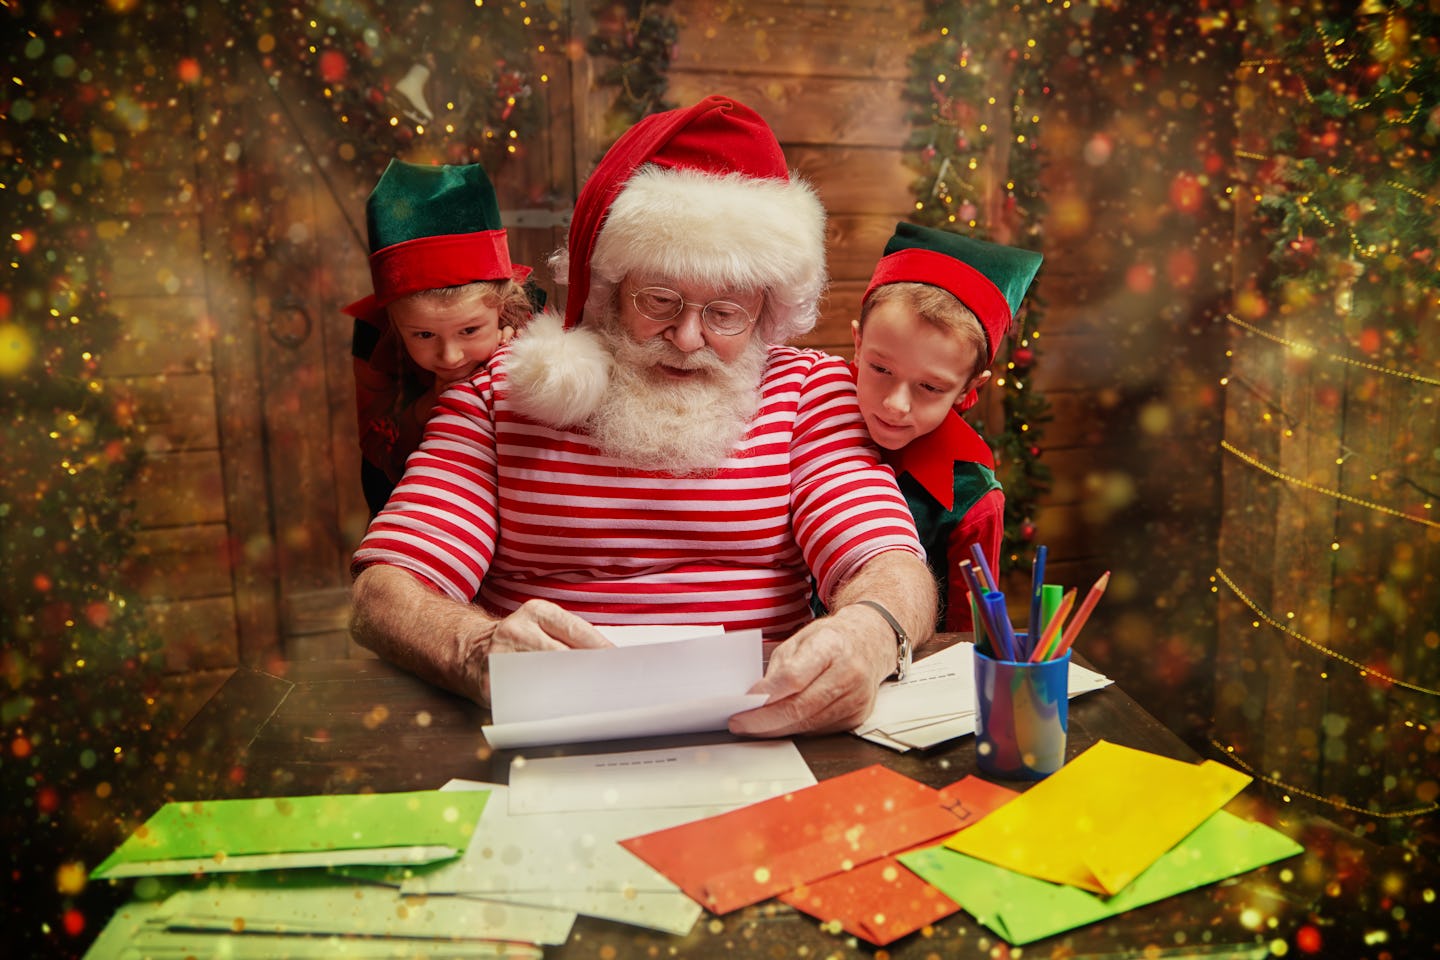 How Many Elves Does Santa Have? Let's Crunch The Numbers